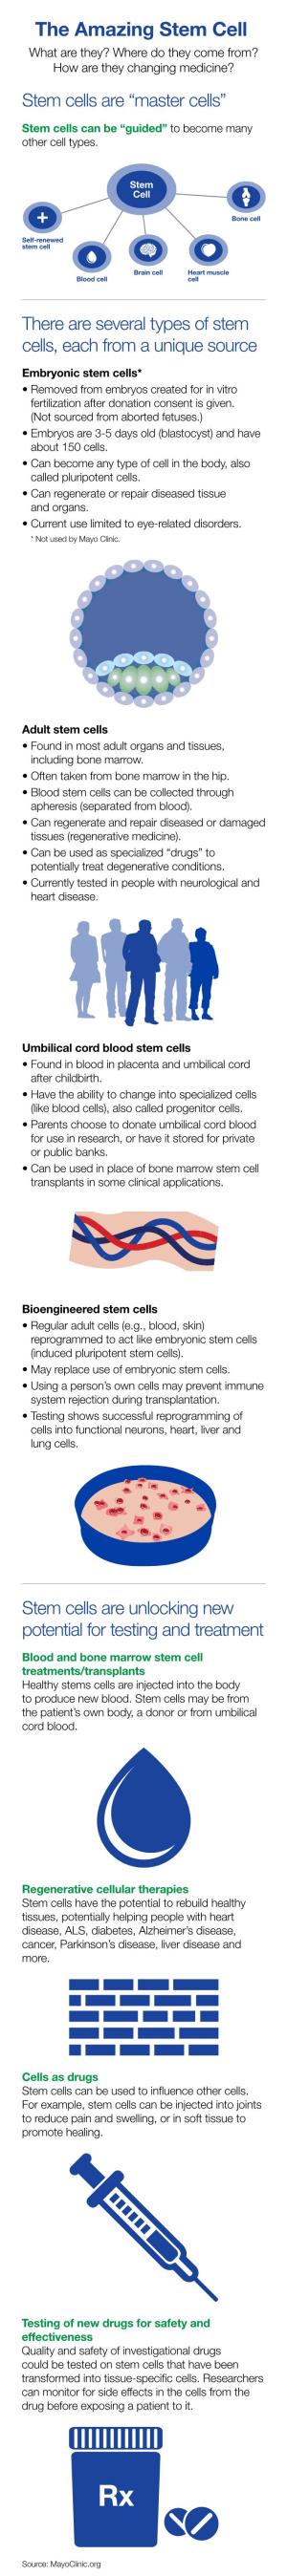 The Amazing Stem Cell What Are They? Where Do They Come From? How Are They Changing Medicine? Stem Cells Are “Master Cells”